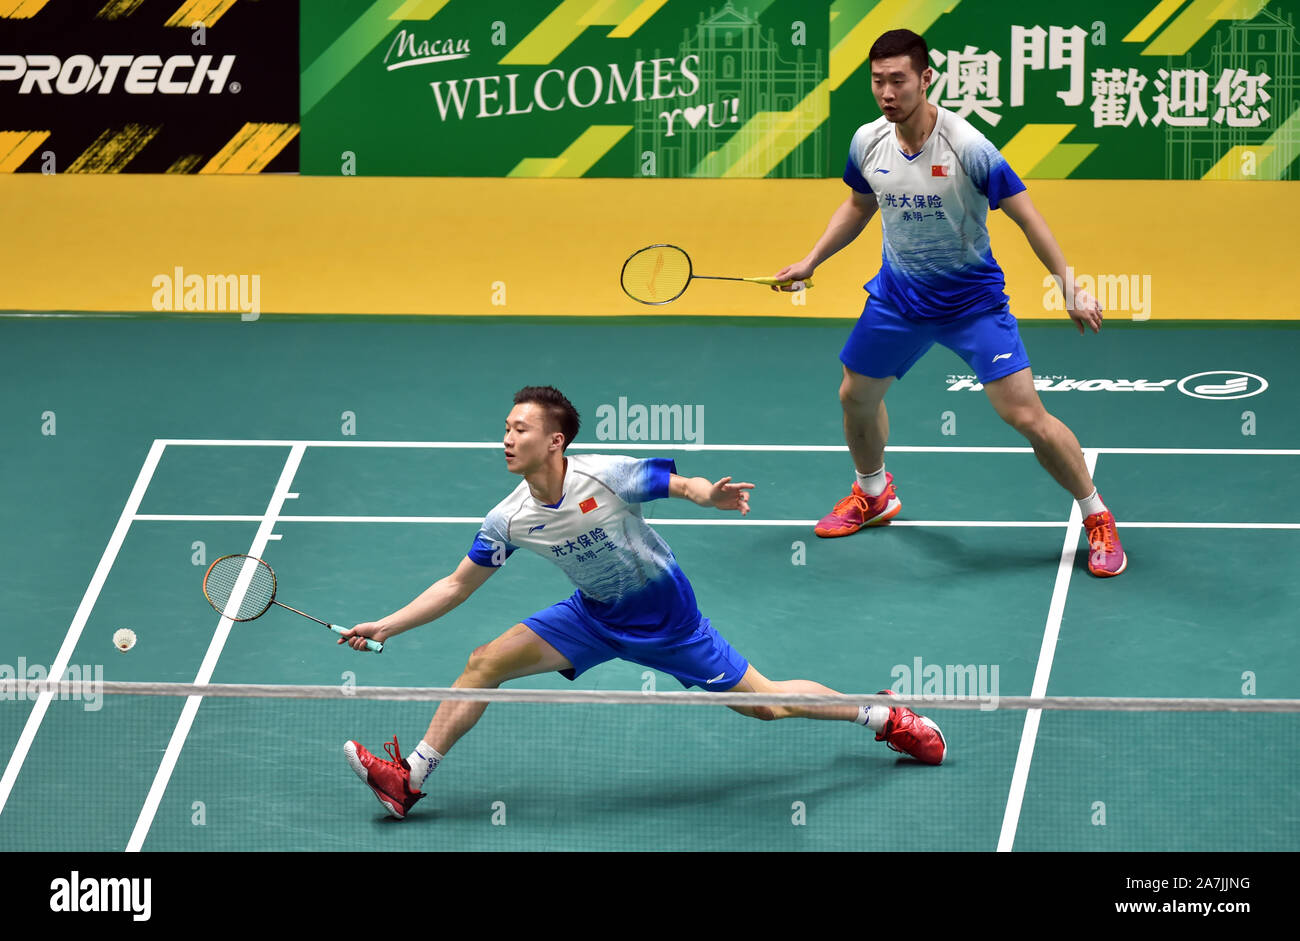 Bwf Approved OEM Badminton Court Flooring With Competitive